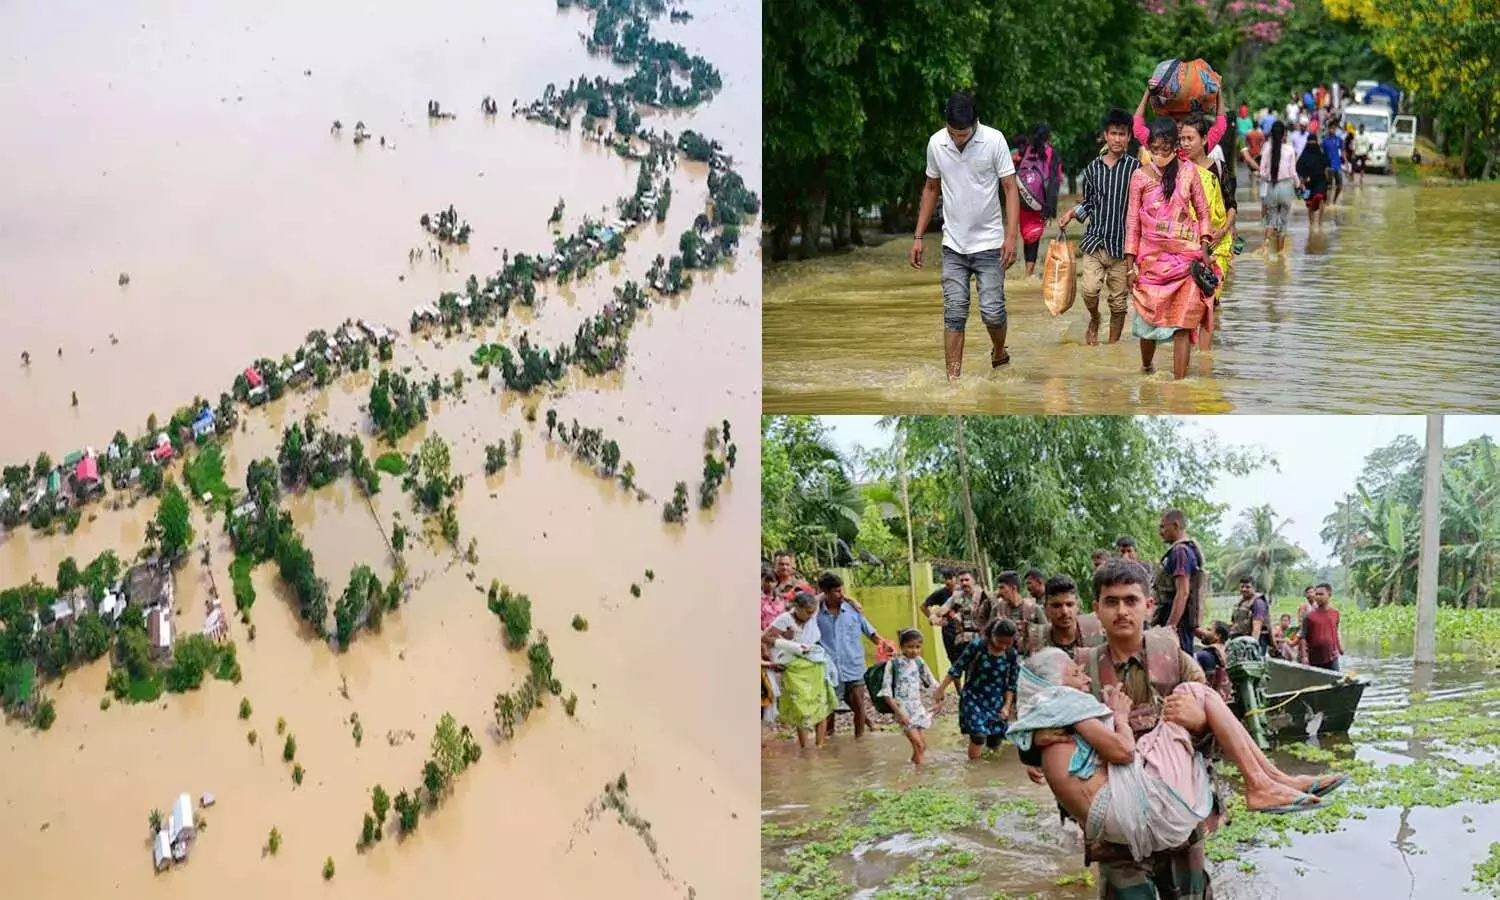 Death toll rising due to floods in Assam, more than 47 lakh people affected